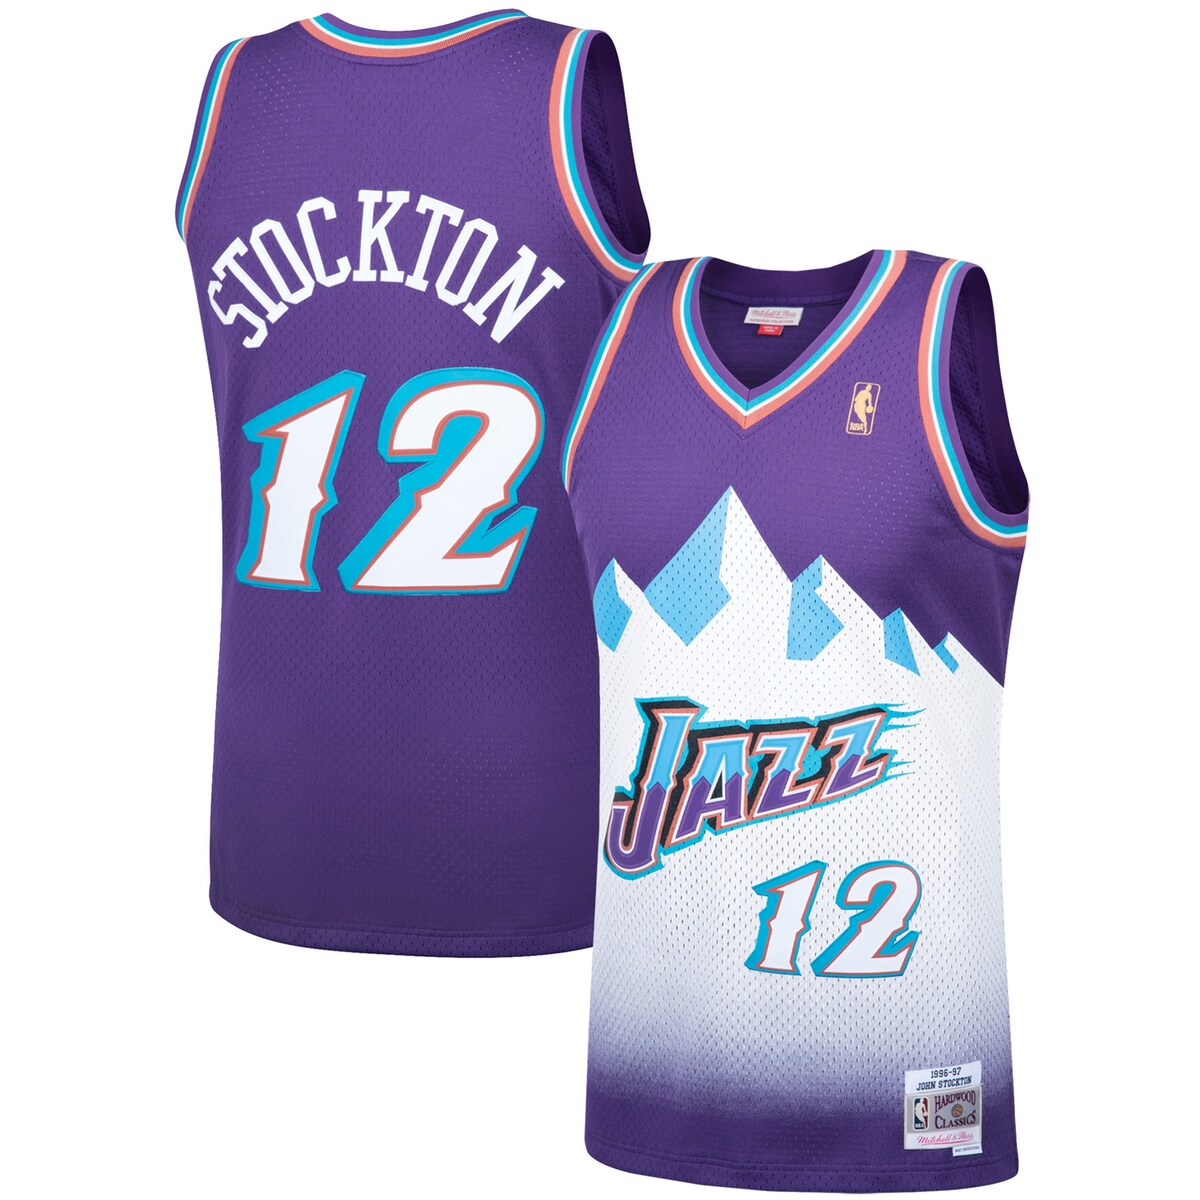 You will always take the time to honor one of the best to wear your favorite team's uniform. Before the next Utah Jazz game tips off, pay homage to the franchise's storied past while also recognizing one of its all-time brightest stars with this John Stockton Hardwood Classics Swingman jersey from Mitchell & Ness. Its throwback-inspired design and player-specific graphics are sure to remind fellow fans of all their favorite Utah Jazz moments, both past and present.Machine wash, line dryBrand: Mitchell & NessOfficially licensedHeat-sealed fabric appliqueMaterial: 100% PolyesterSide splits at bottom hemSide trim with sublimated stripesSleevelessTackle twill graphicsWoven jock tag, bottom left hemImportedBack neck tapingSwingman Throwback